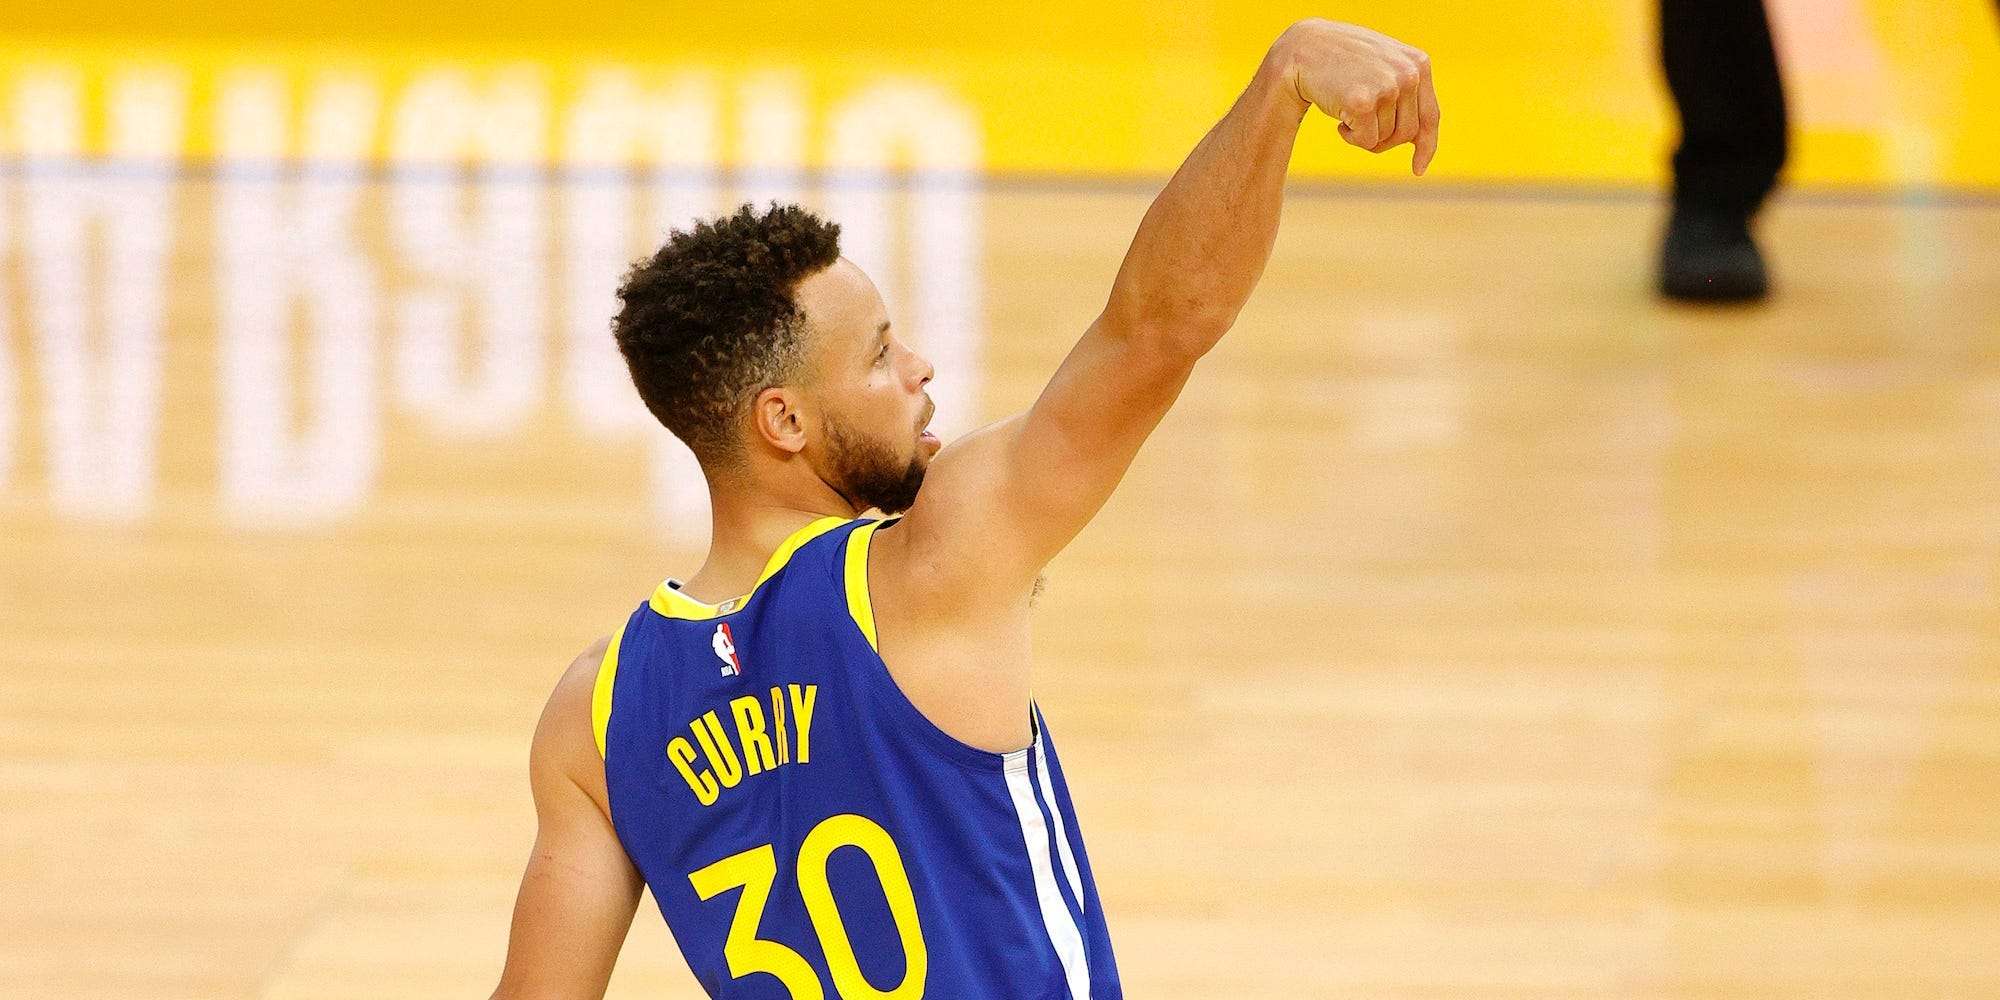 Why The Key To The Warriors Winning Games Could Be Letting Stephen Curry Hoist An Unprecedented